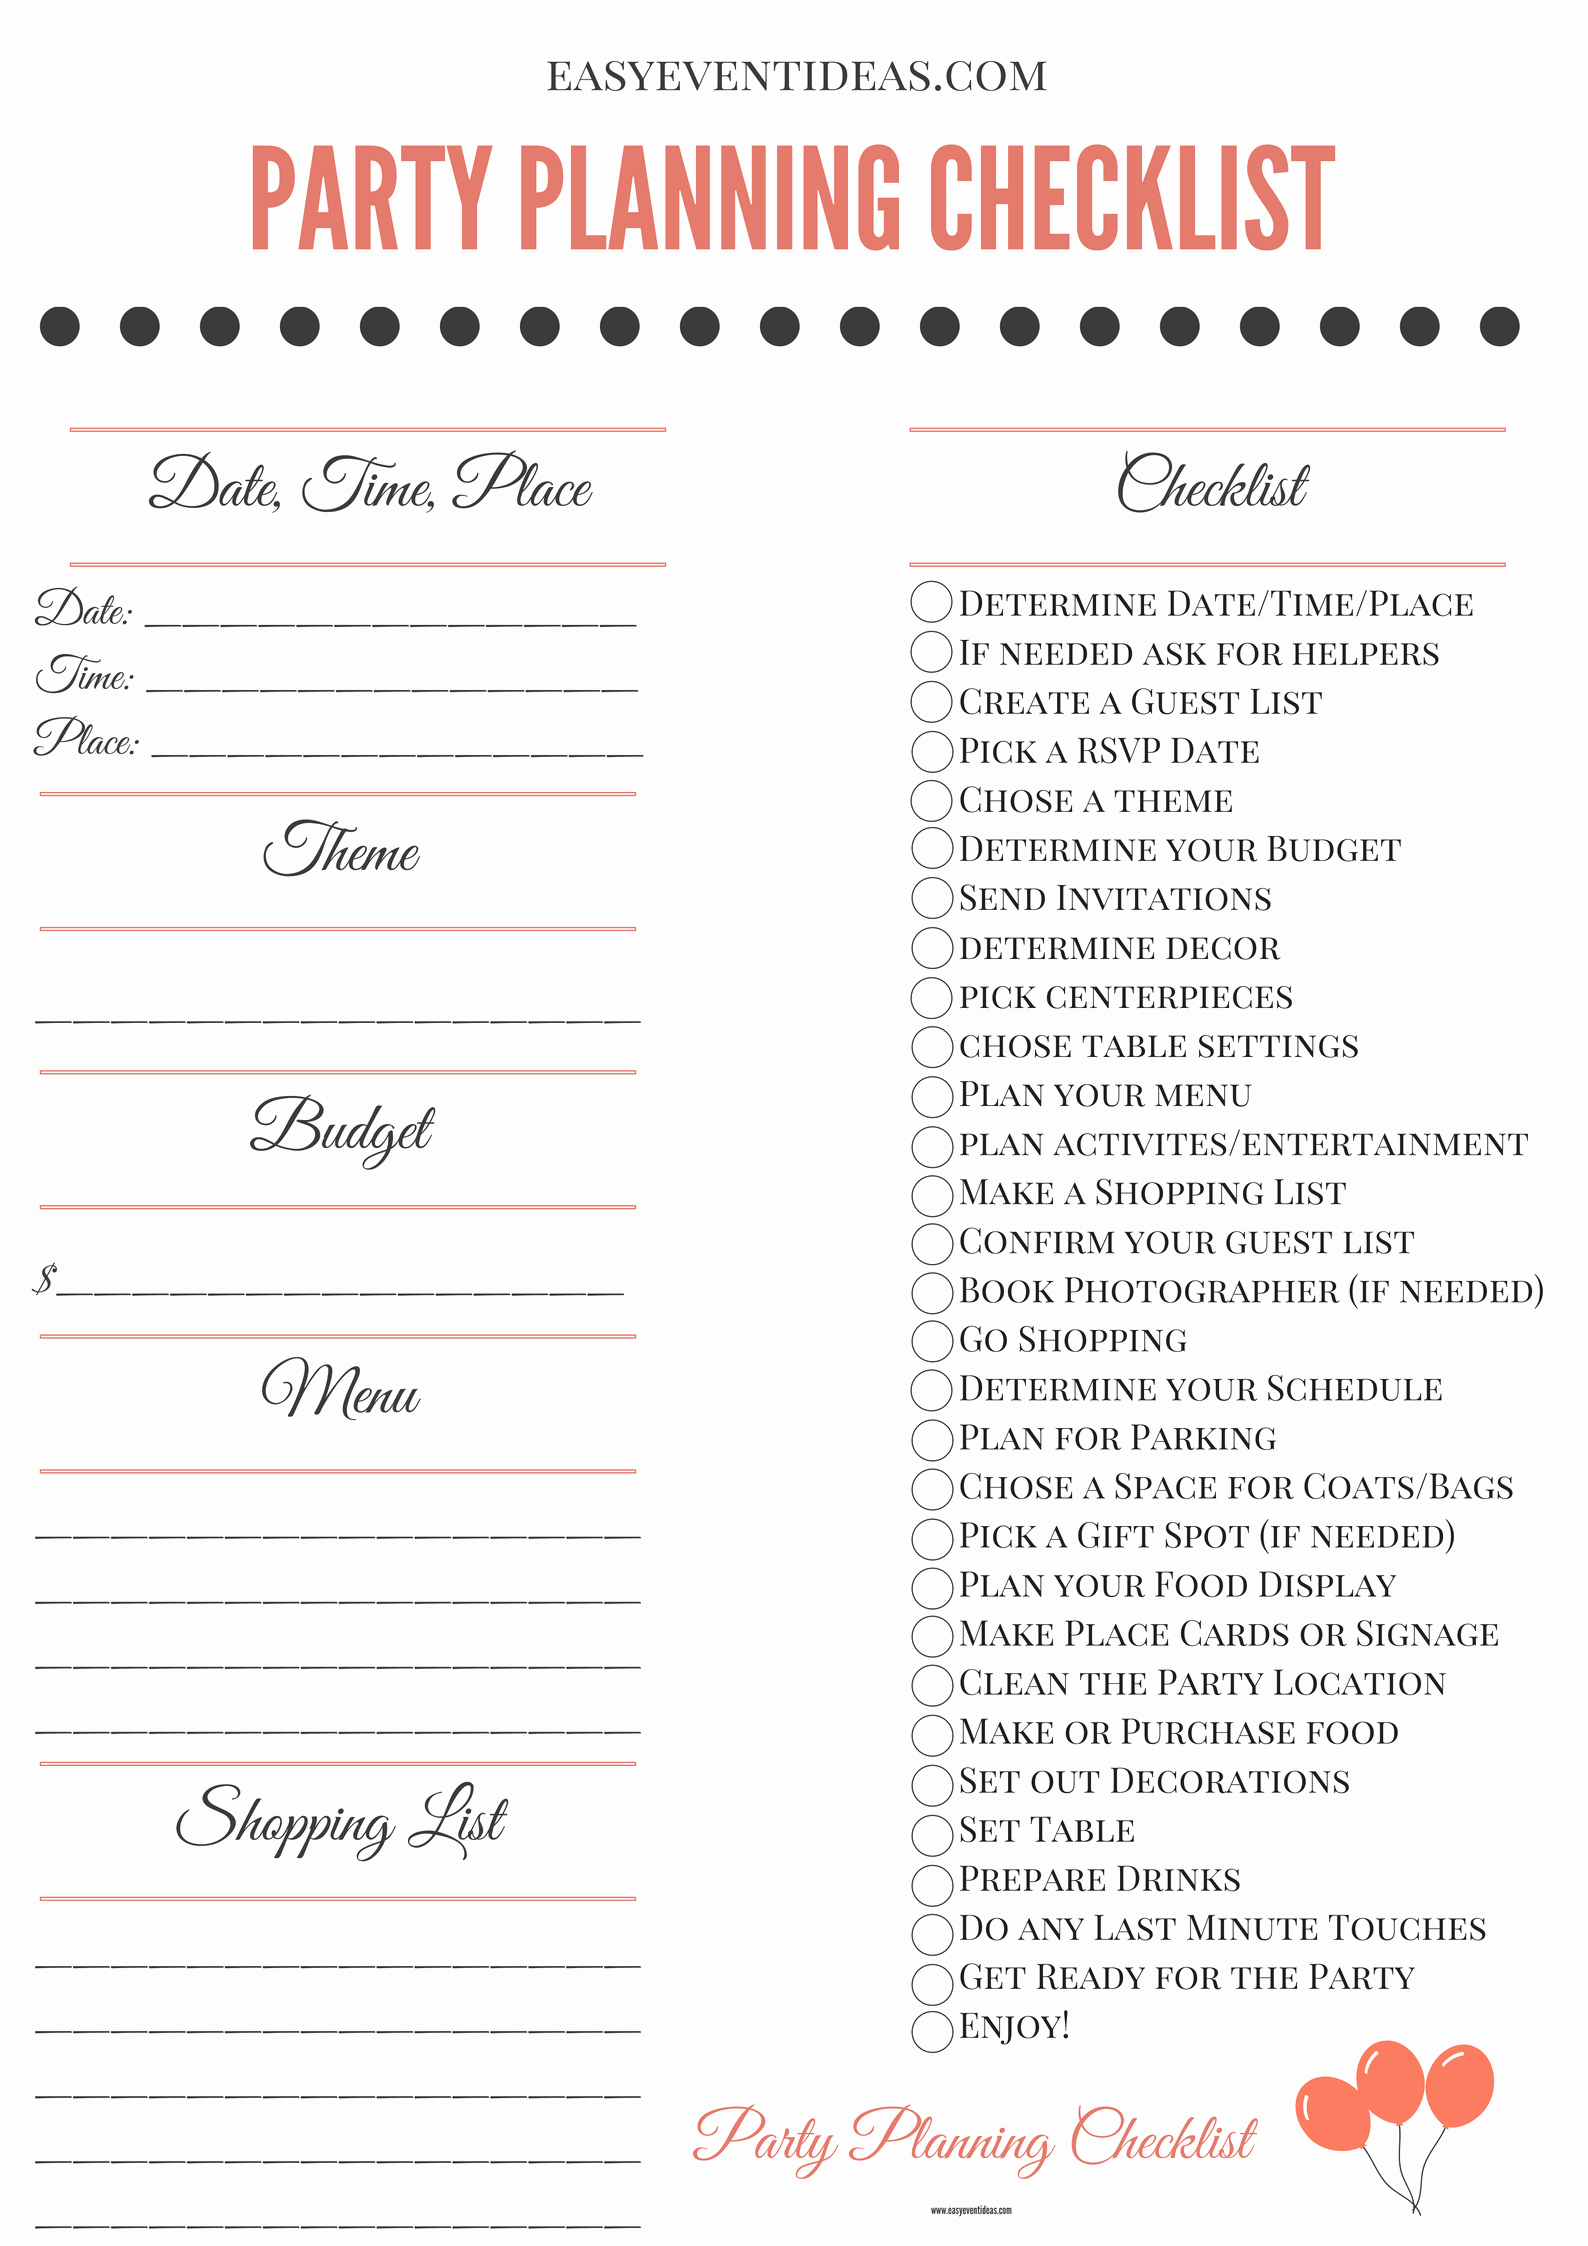 Party Planner Checklist Template Free Elegant Printable Party Planning Checklist – Easy event Ideas